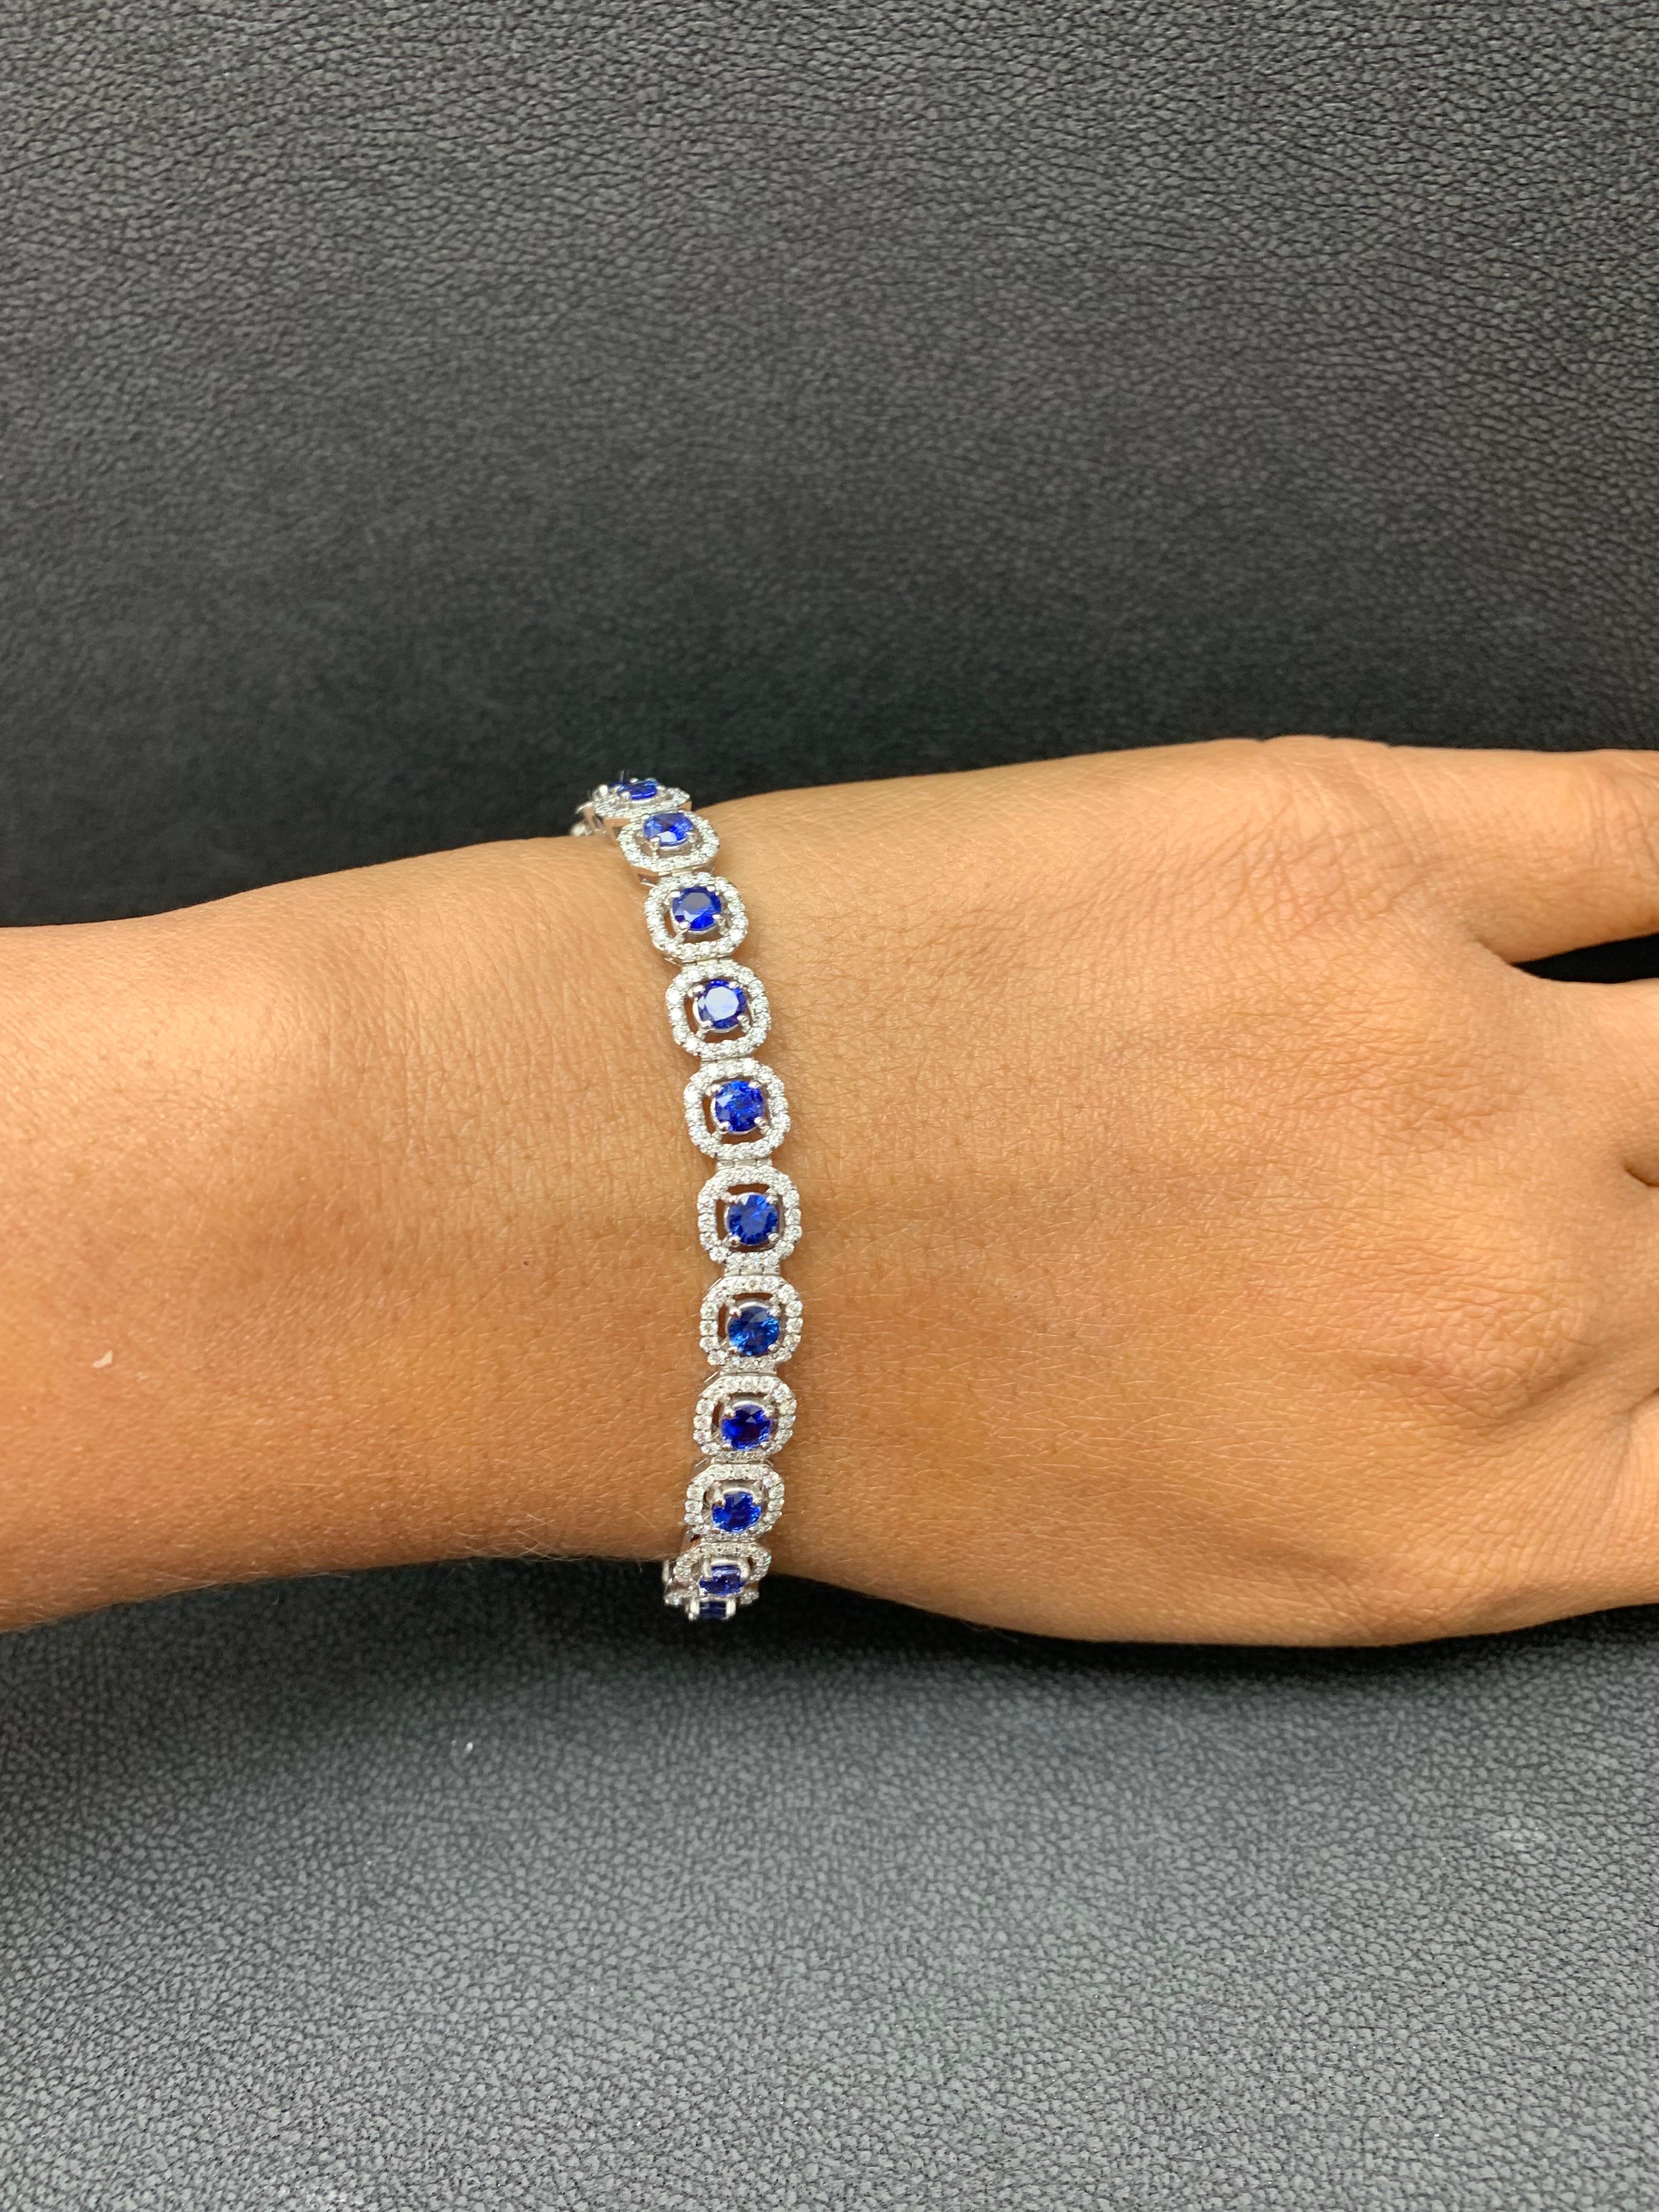 This gorgeous bracelet features 25 round brilliant blue sapphires weighing 4.85 carats total. Each stone is surrounded by a single row of small round diamonds weighing 2.40 carats total. Set in 14k white gold.

Style available in different price